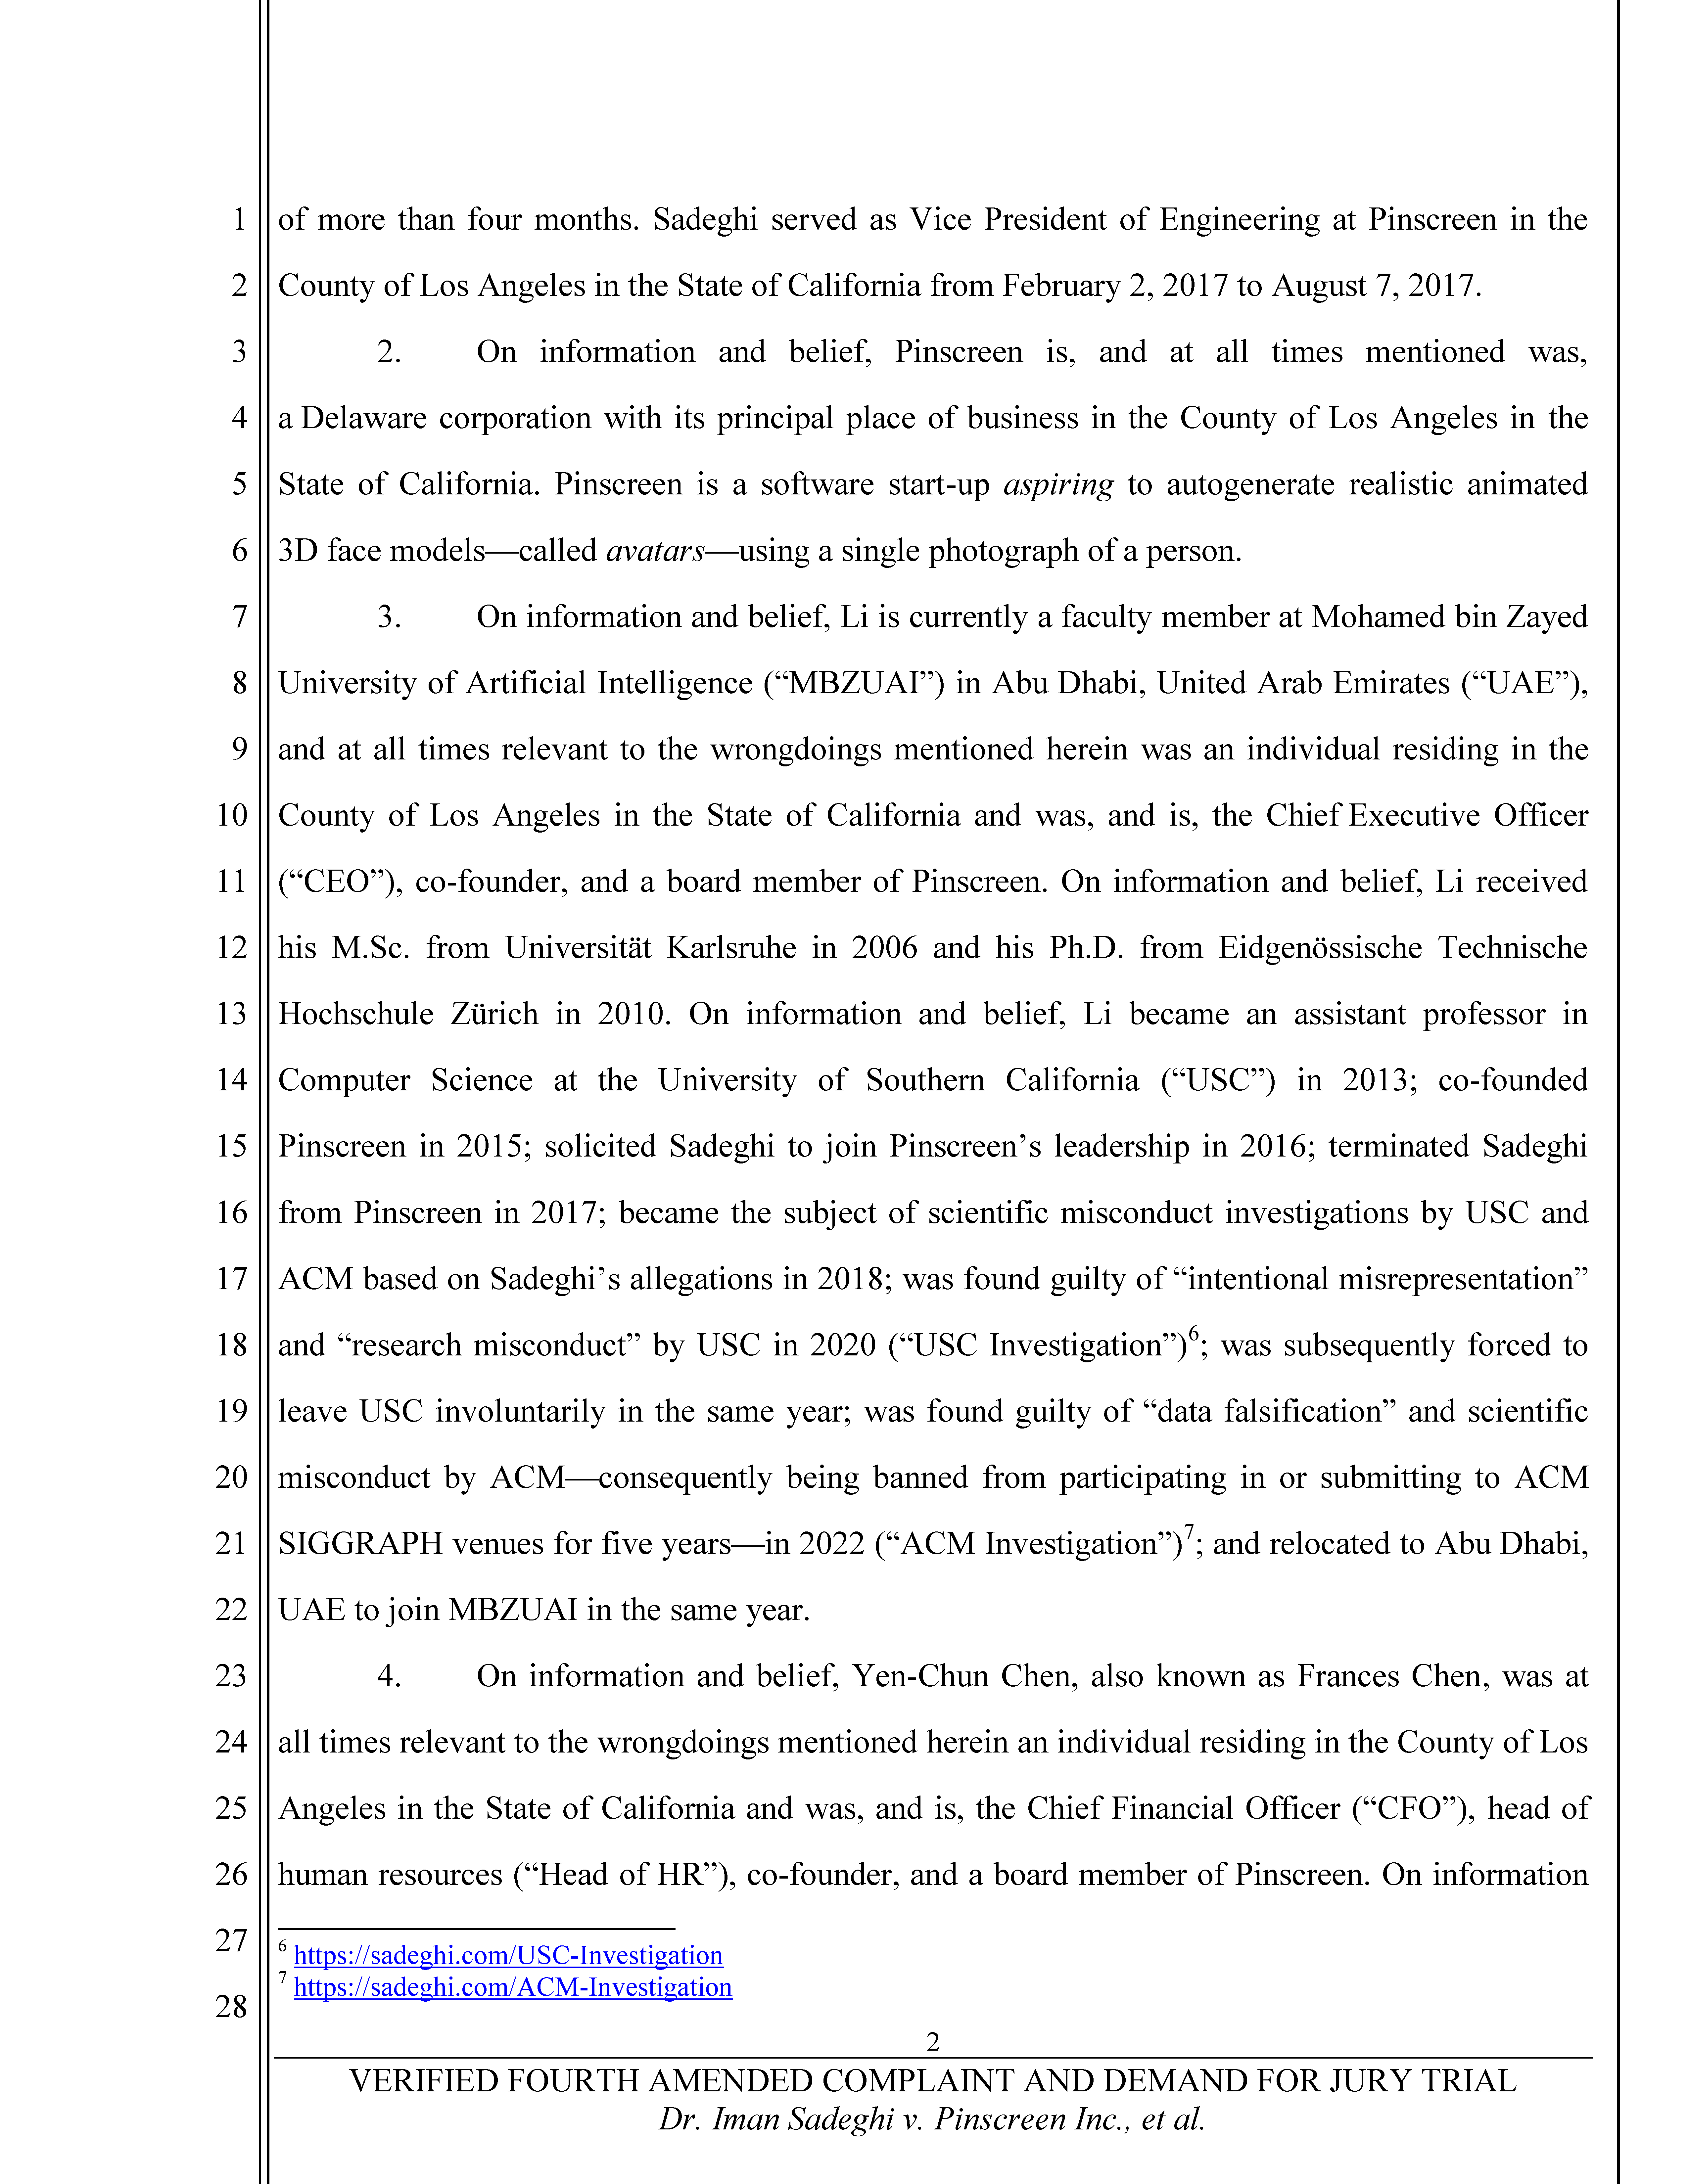 Fourth Amended Complaint (4AC) Page 3